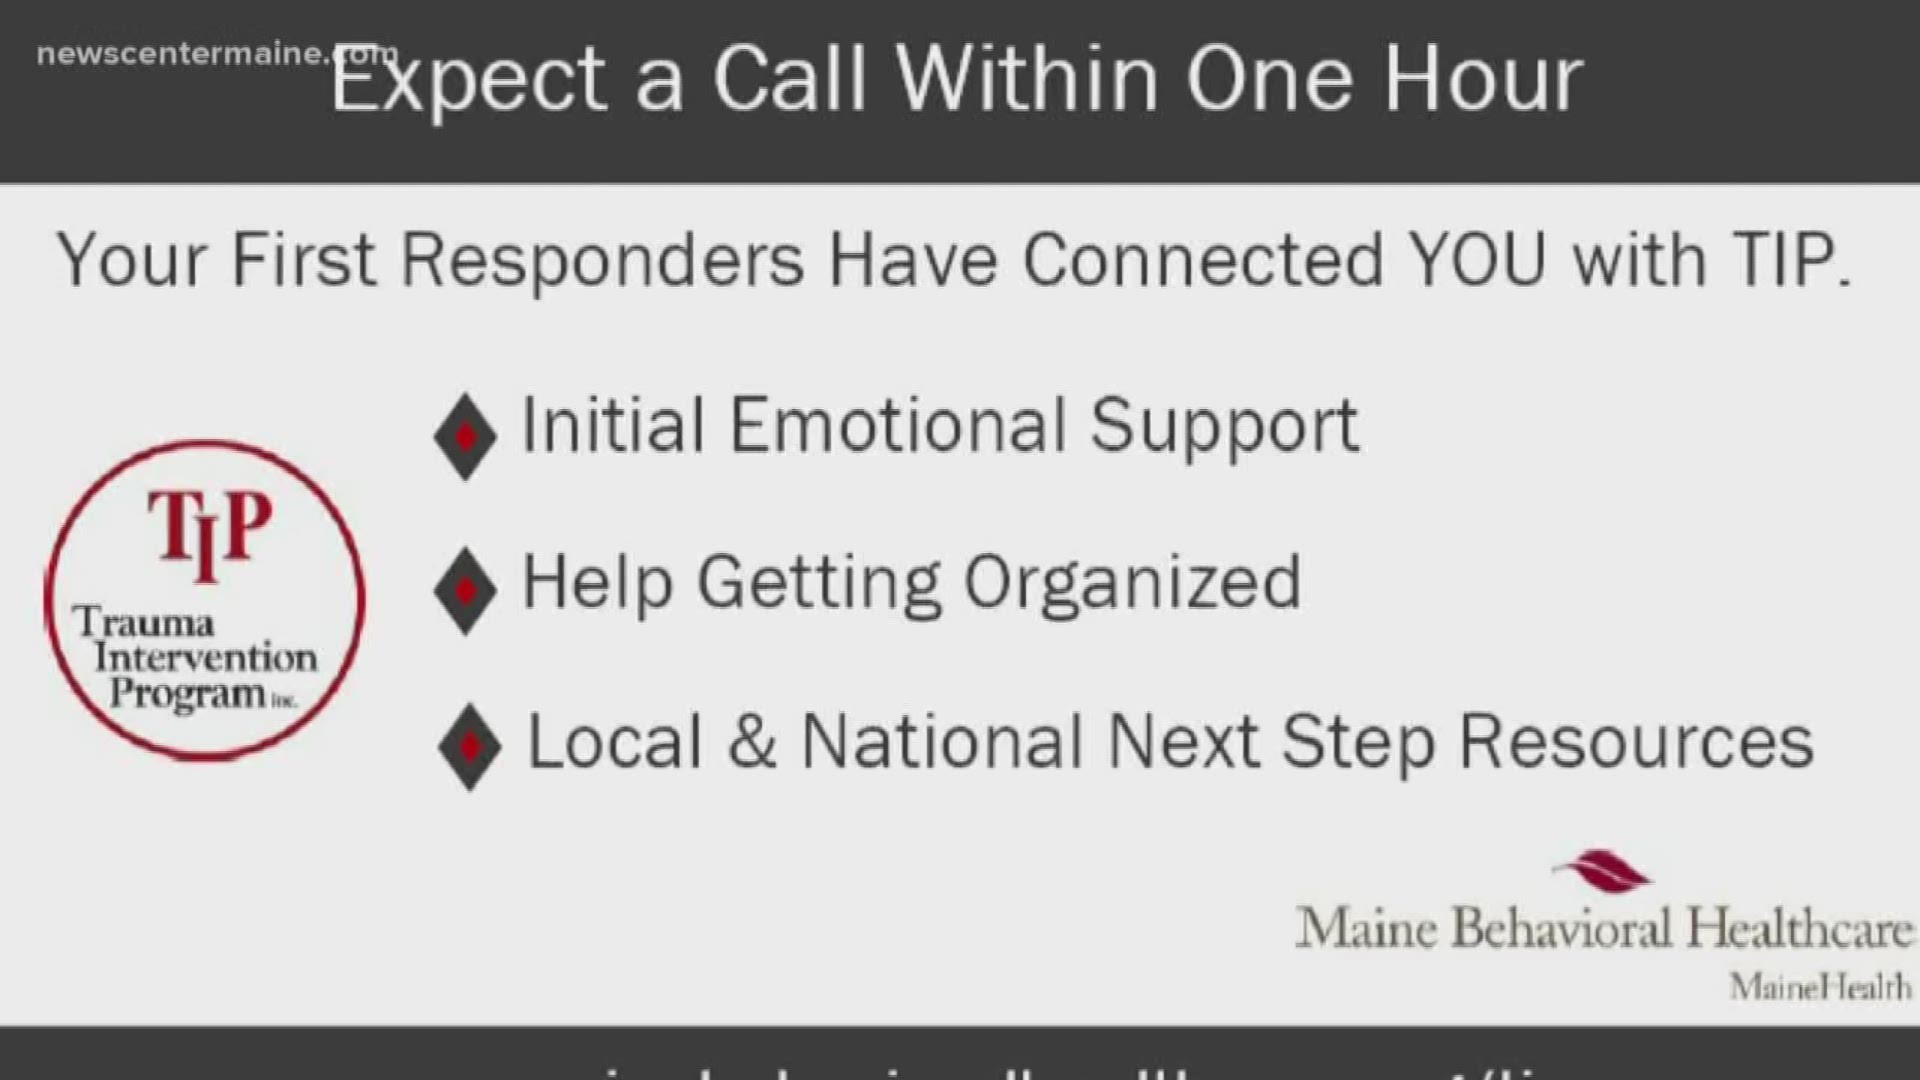 TIP program adapts to help Mainers amid COVID-19